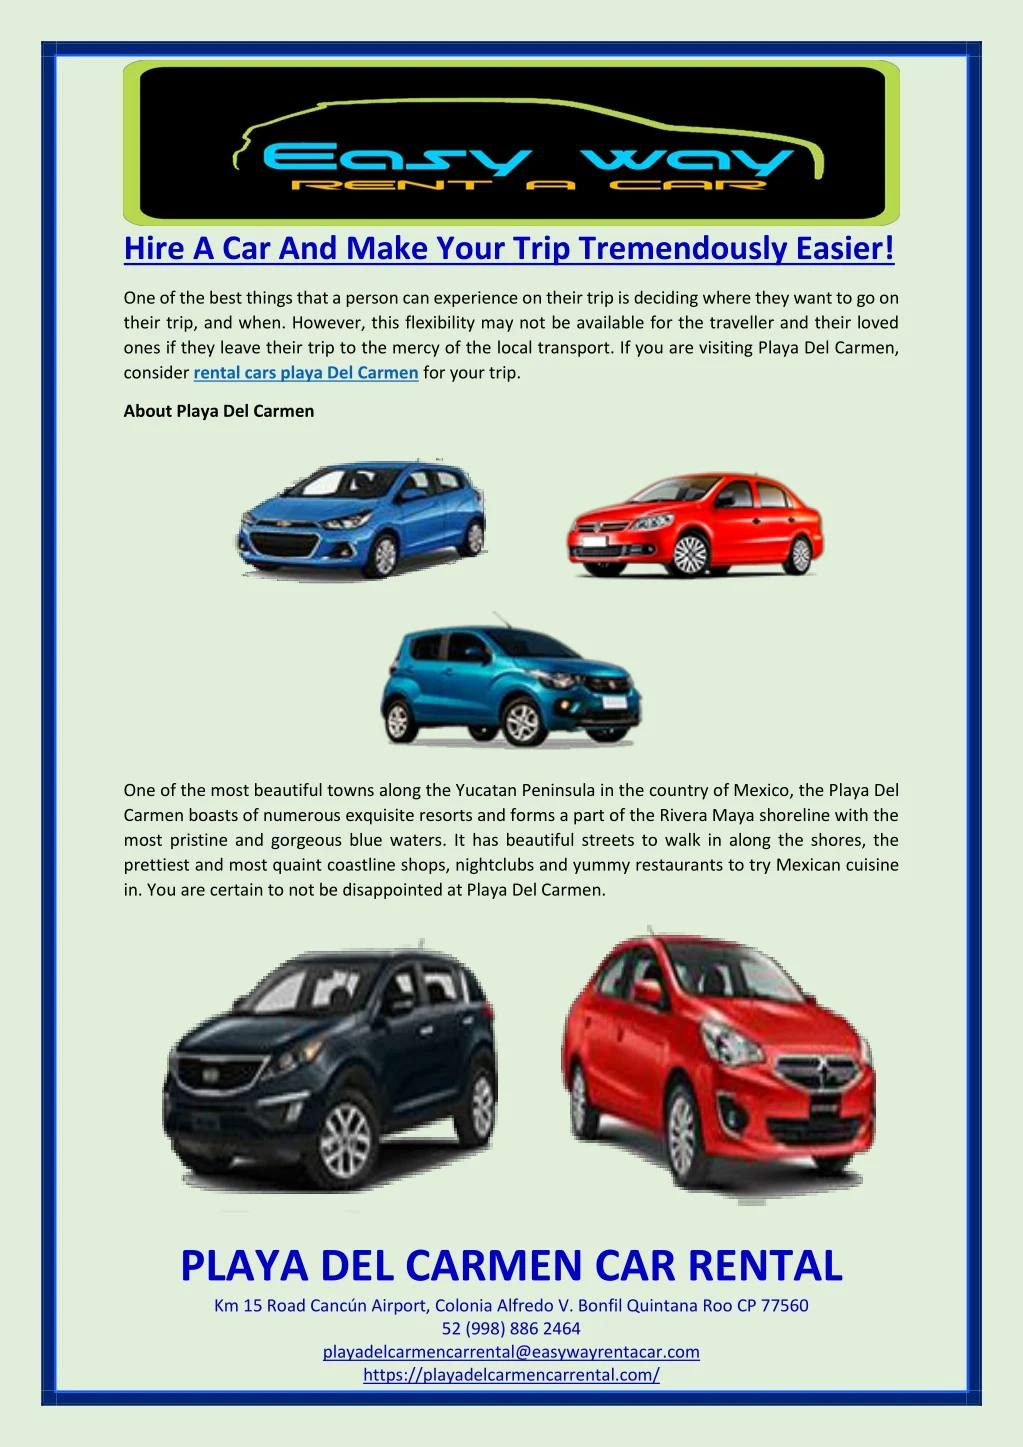 hire a car and make your trip tremendously easier